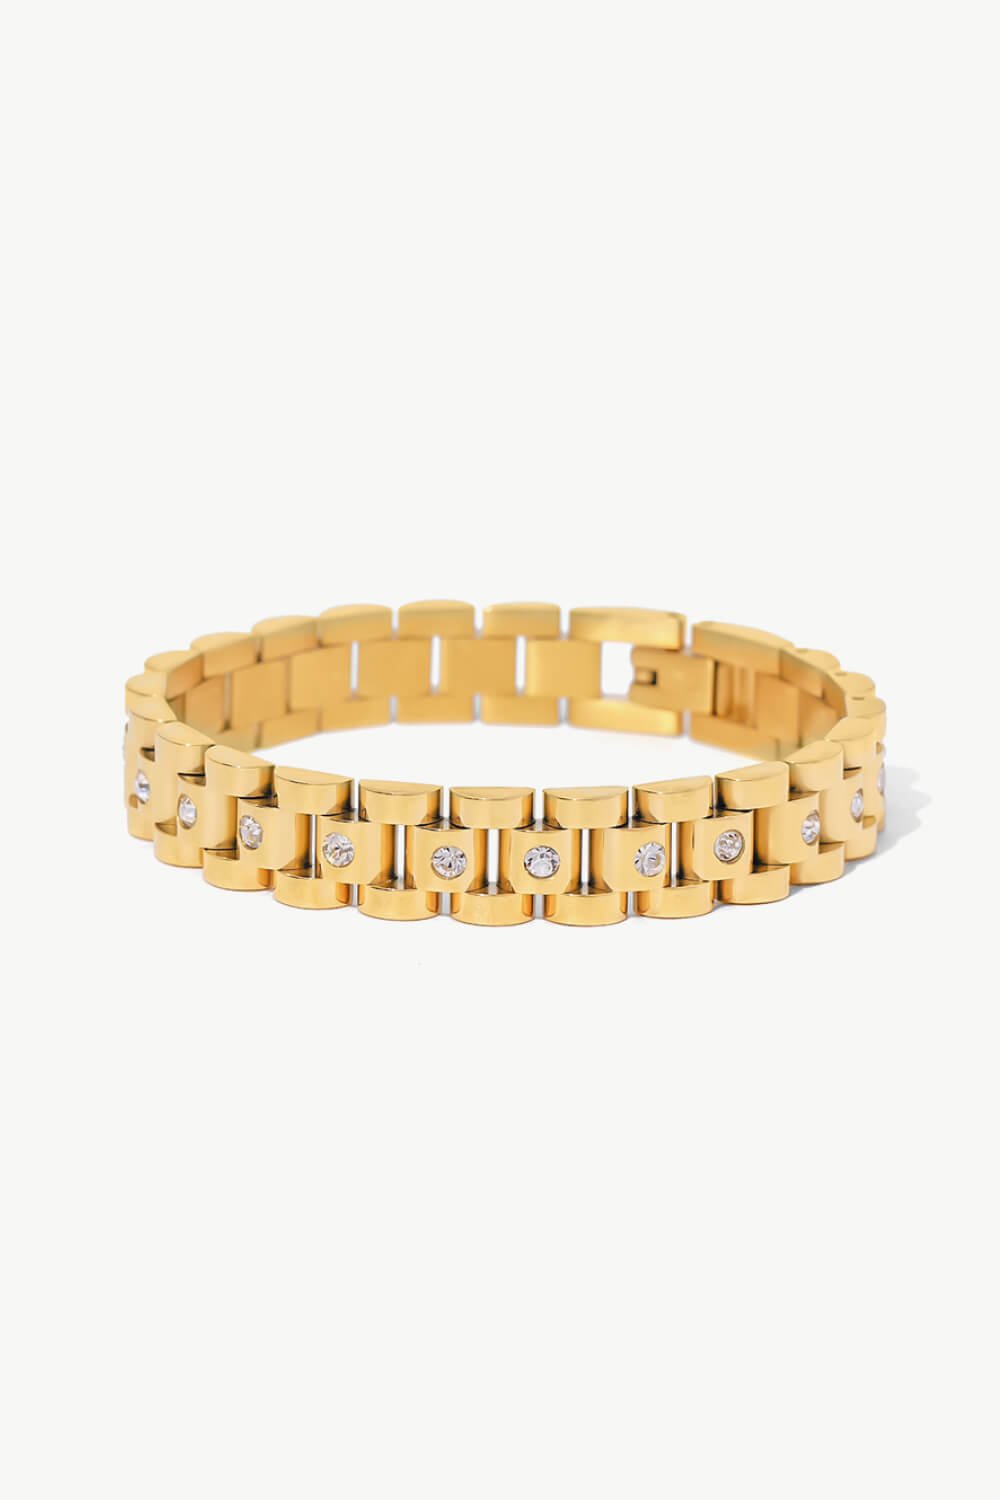 18K Gold-Plated Watch Band Bracelet - Uylee's Boutique